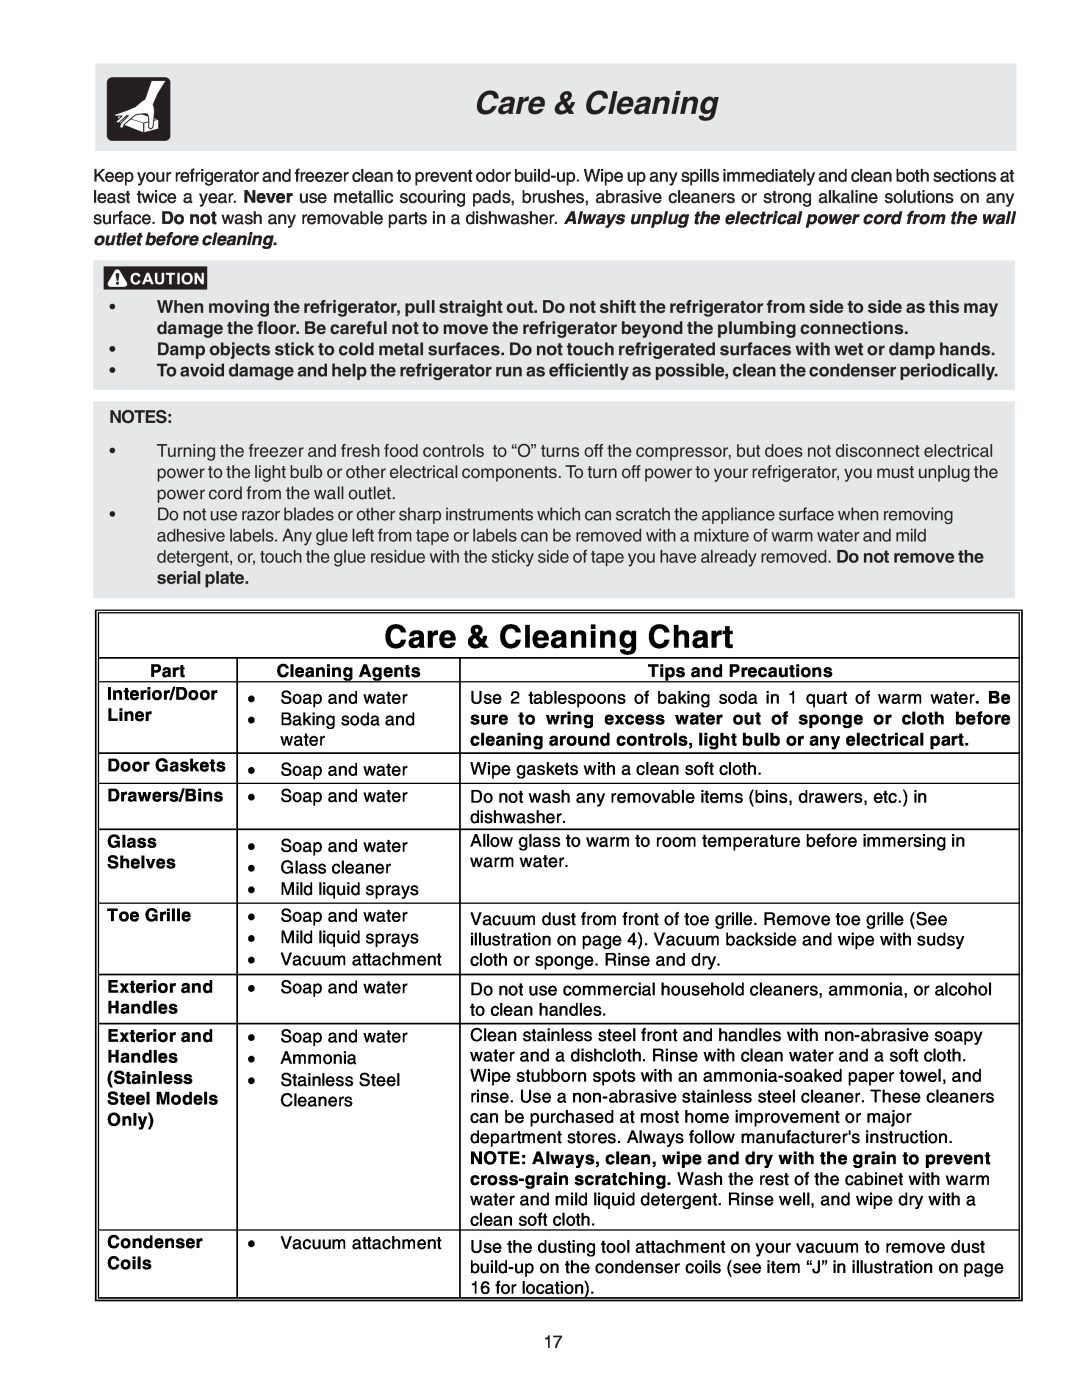 Electrolux - Gibson 241512200 manual Care & Cleaning Chart 